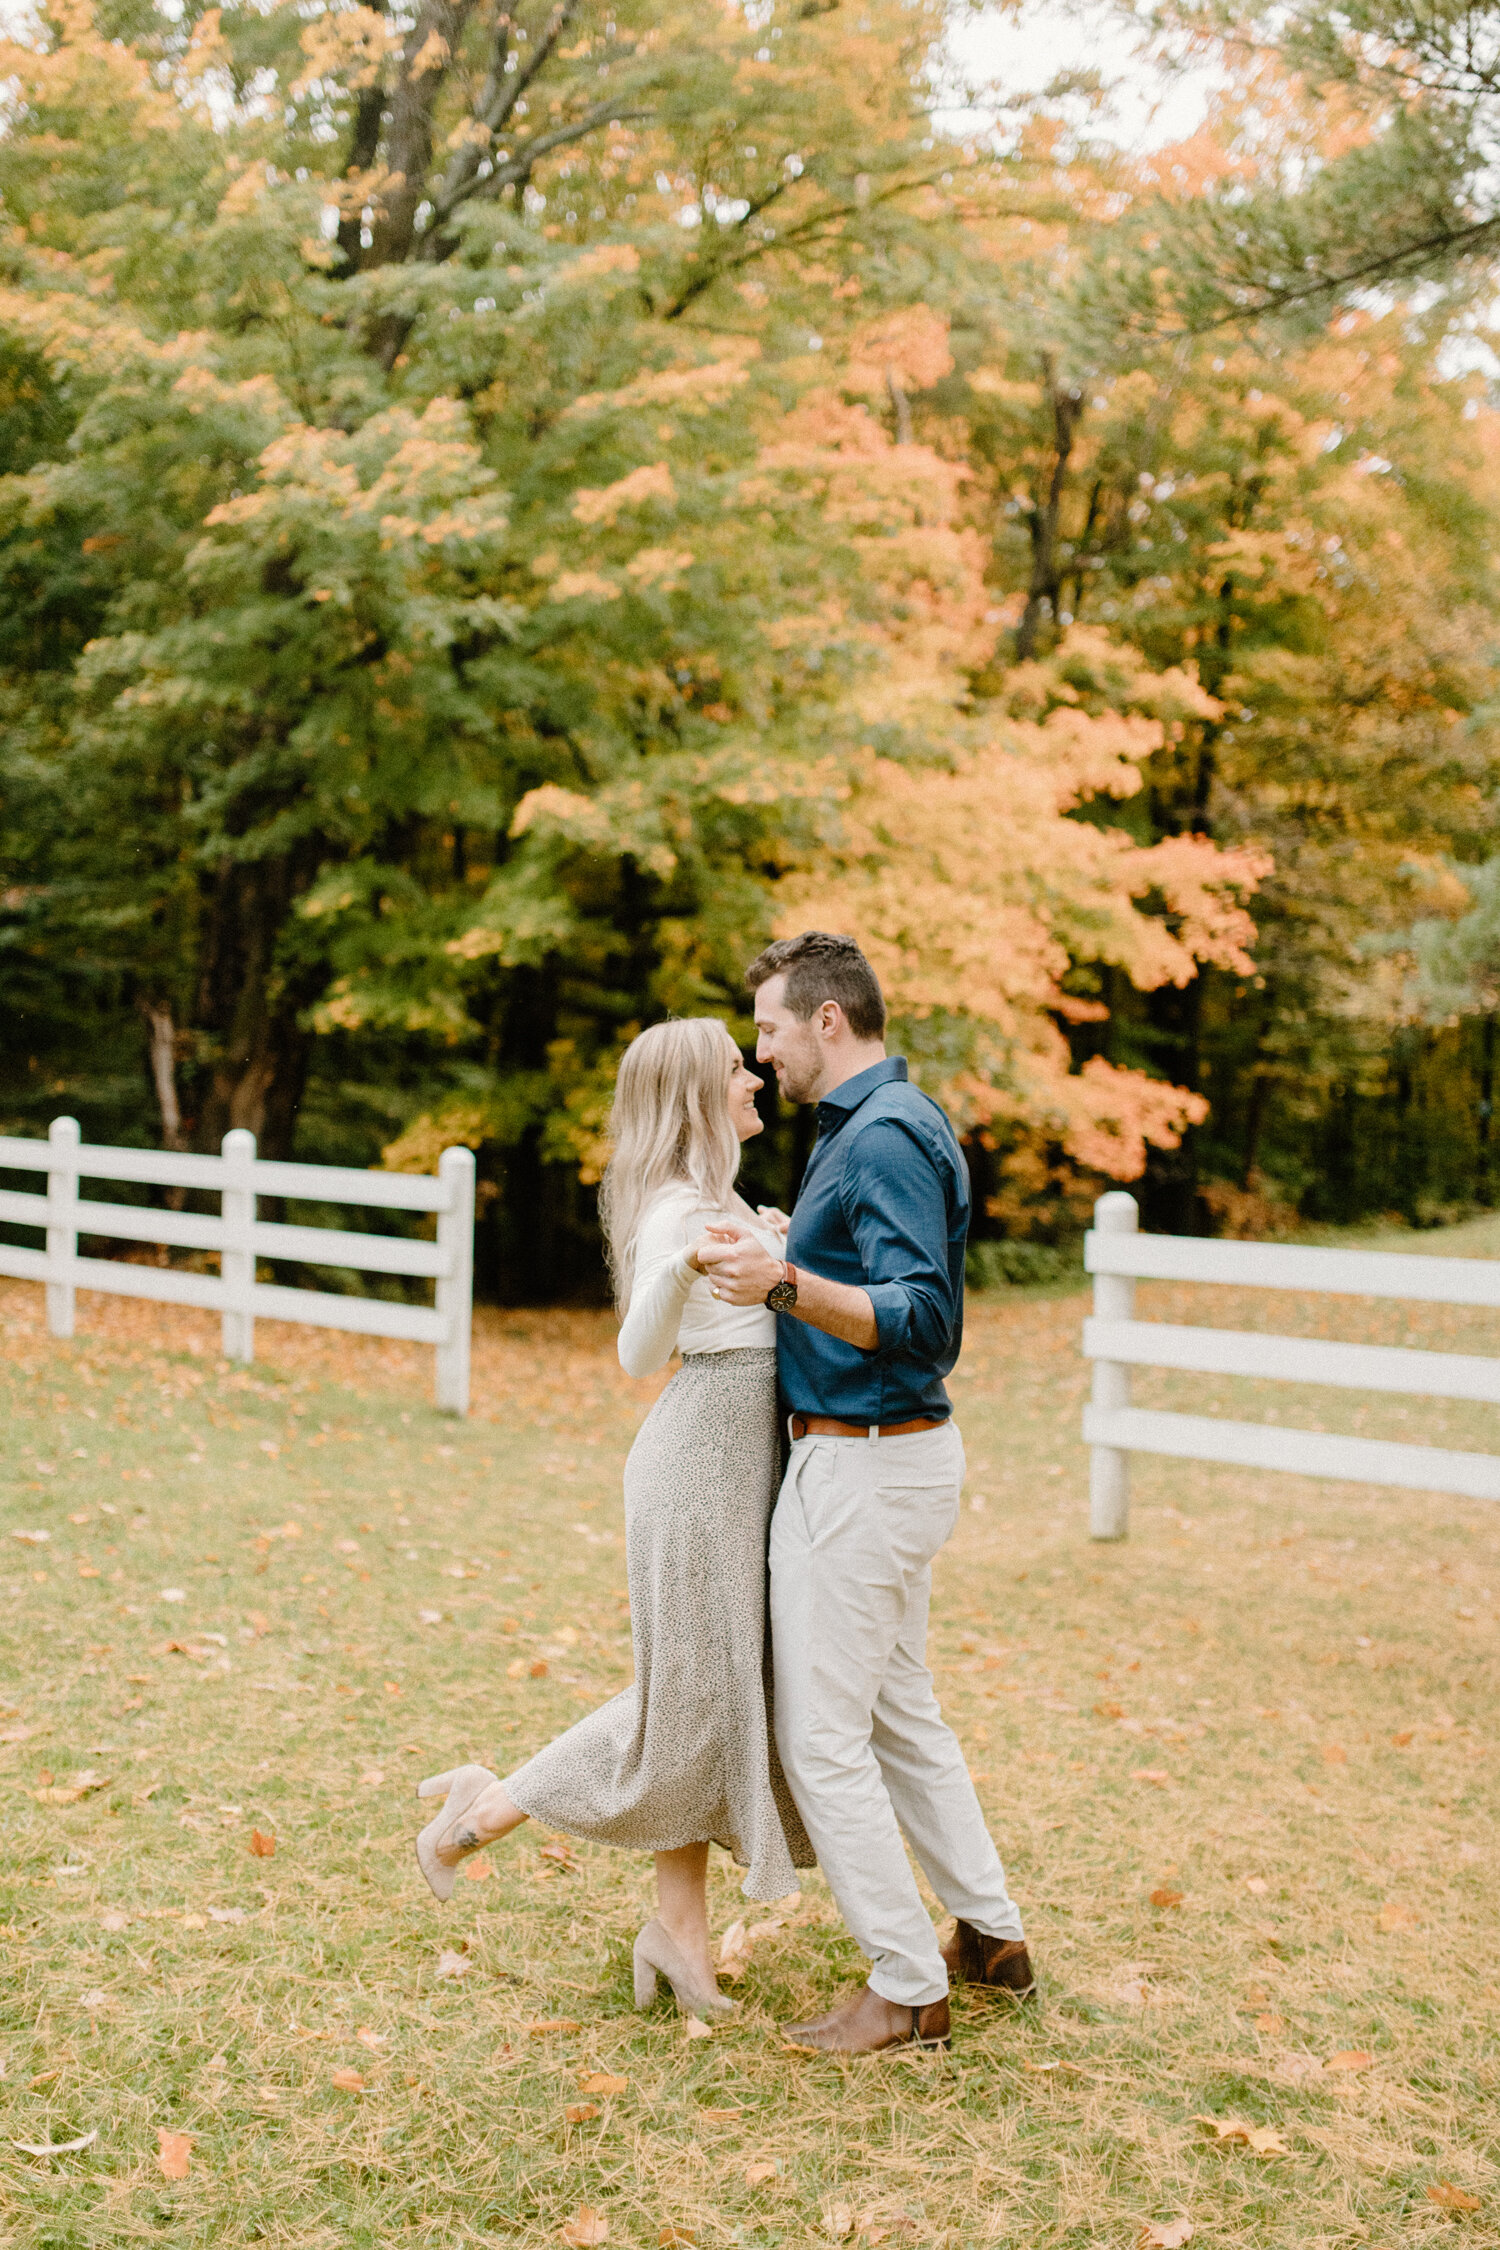  Quebec, Canada engagement photographer, Chelsea Mason Photography captures this engaged couple smiling and holding hands during their autumn engagements. cream and navy colored engagement outfit, long medium blonde womens loose curled hair, womens t